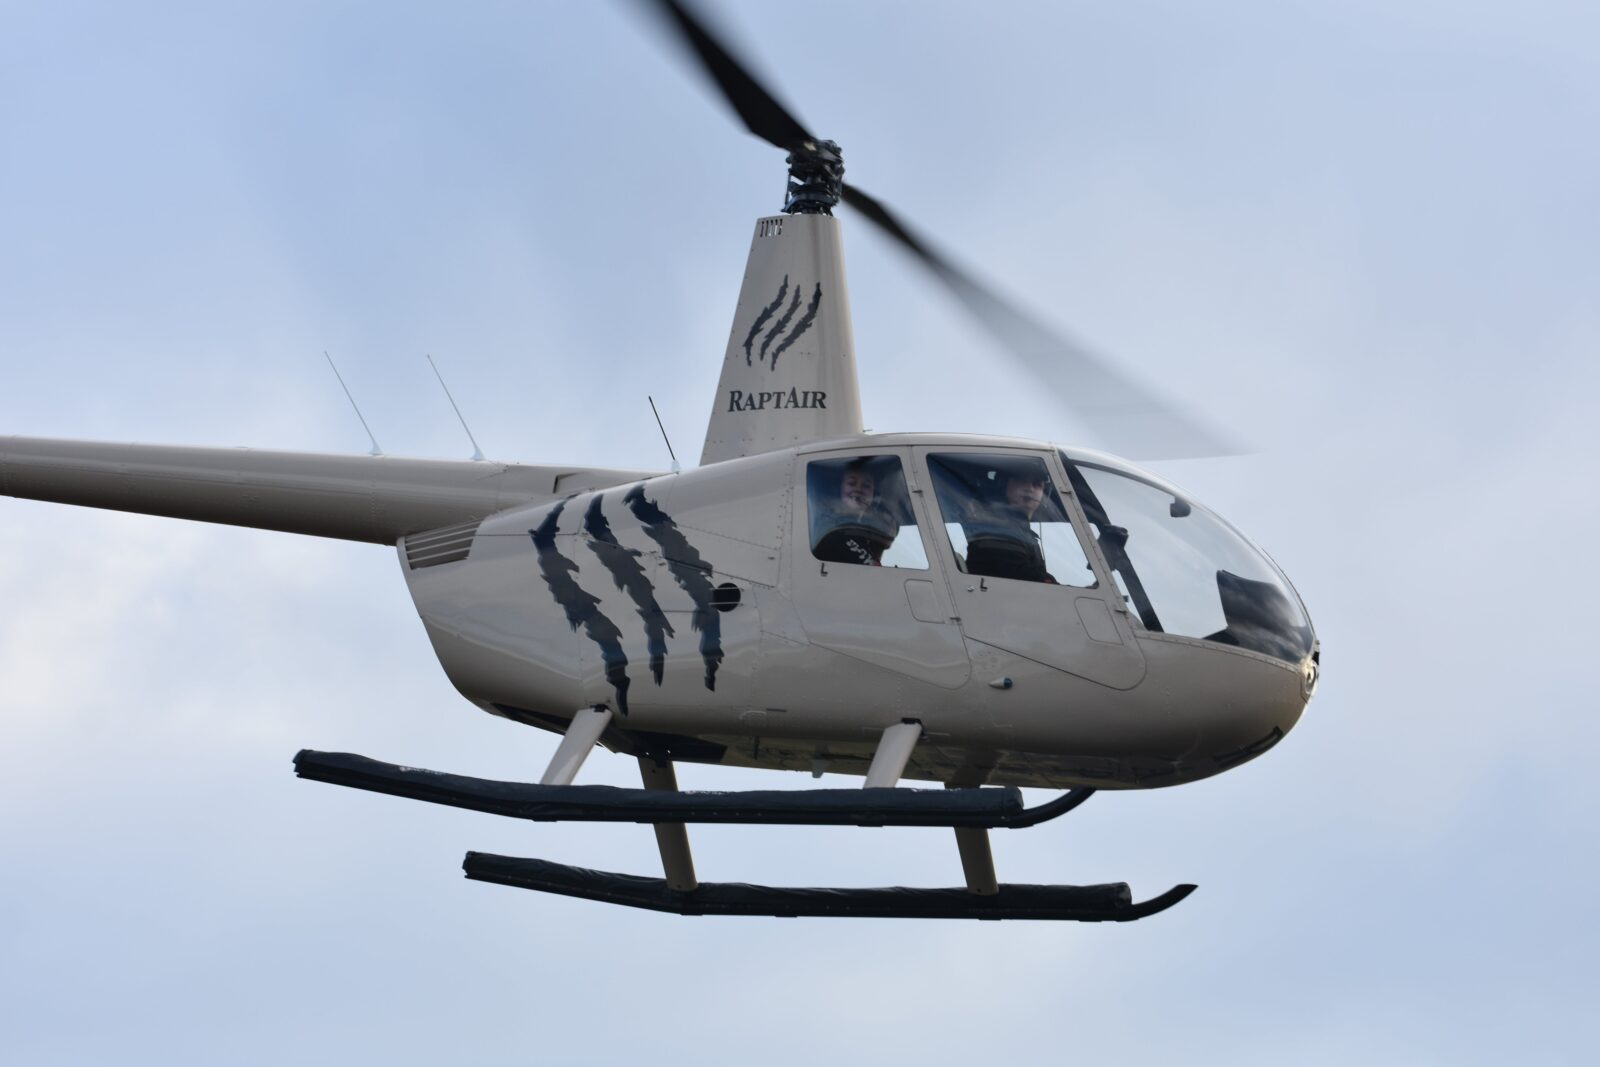 Sandstone coloured Helicopter with black decals